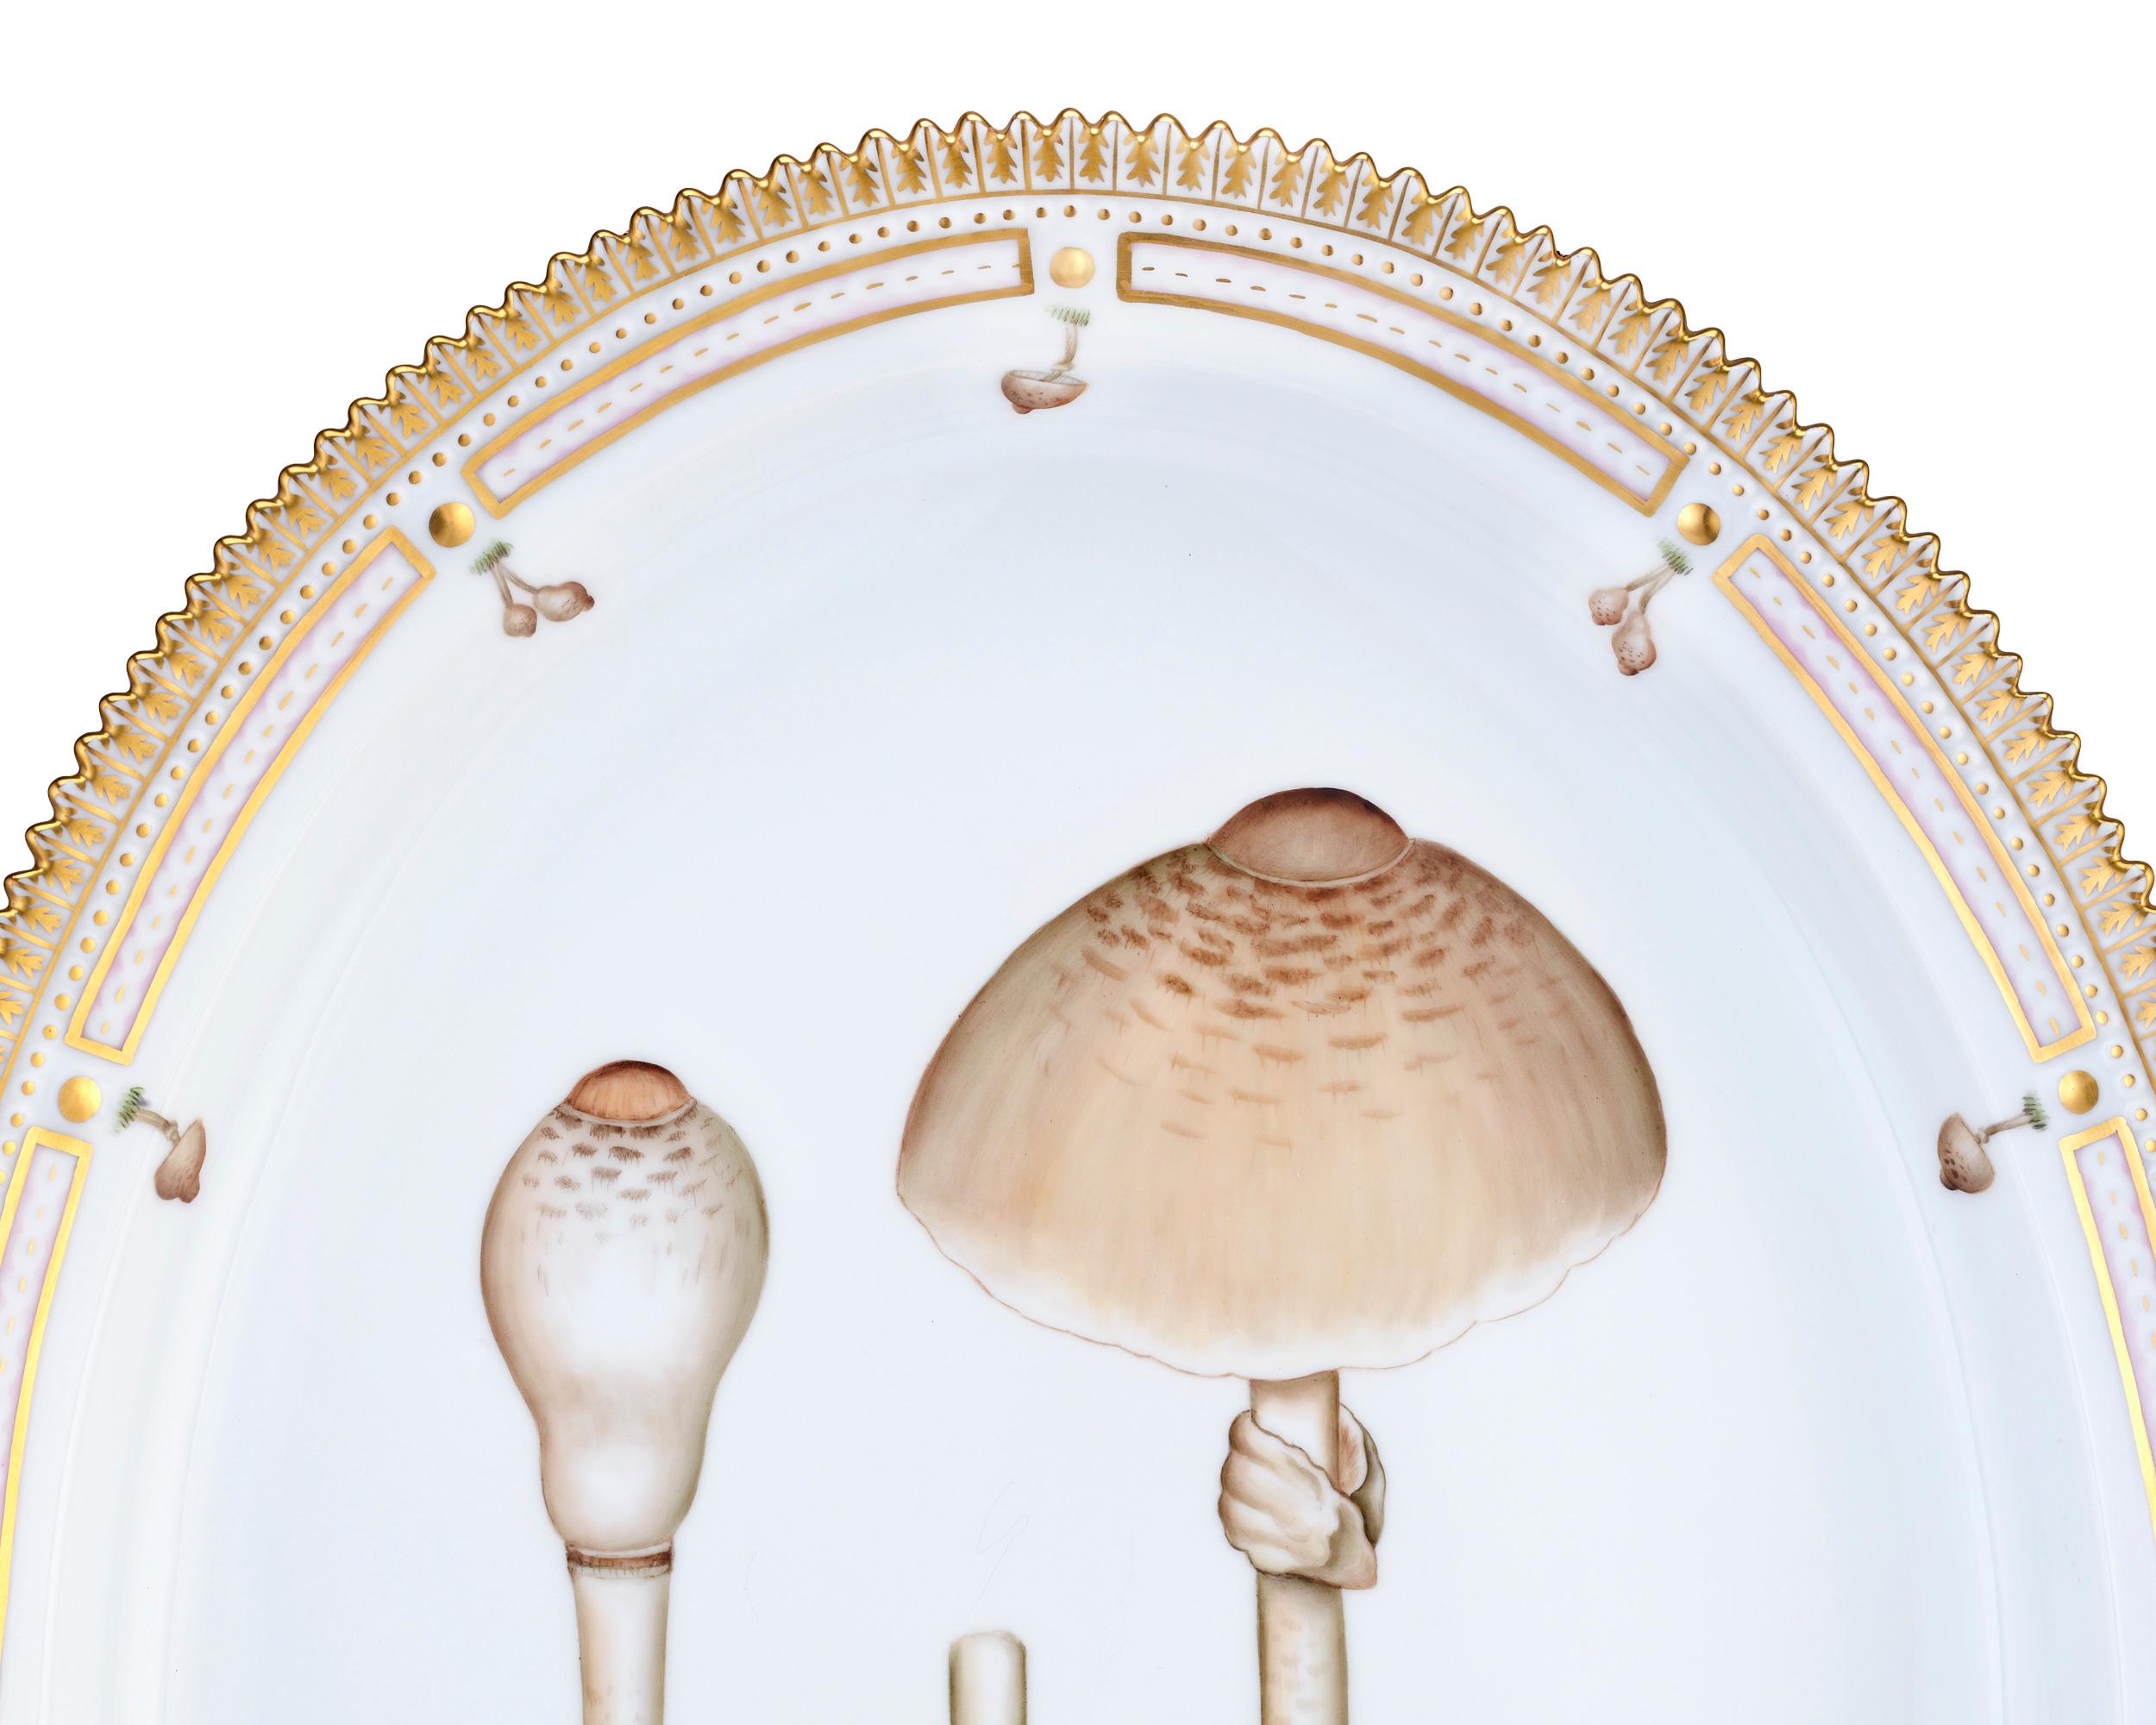 This rare Royal Copenhagen porcelain platter was custom-crafted in the famed Flora Danica Fungi pattern. Flora Danica is known worldwide for its extraordinary illustrations of native flowers of Denmark, but this dish is part of a very special series